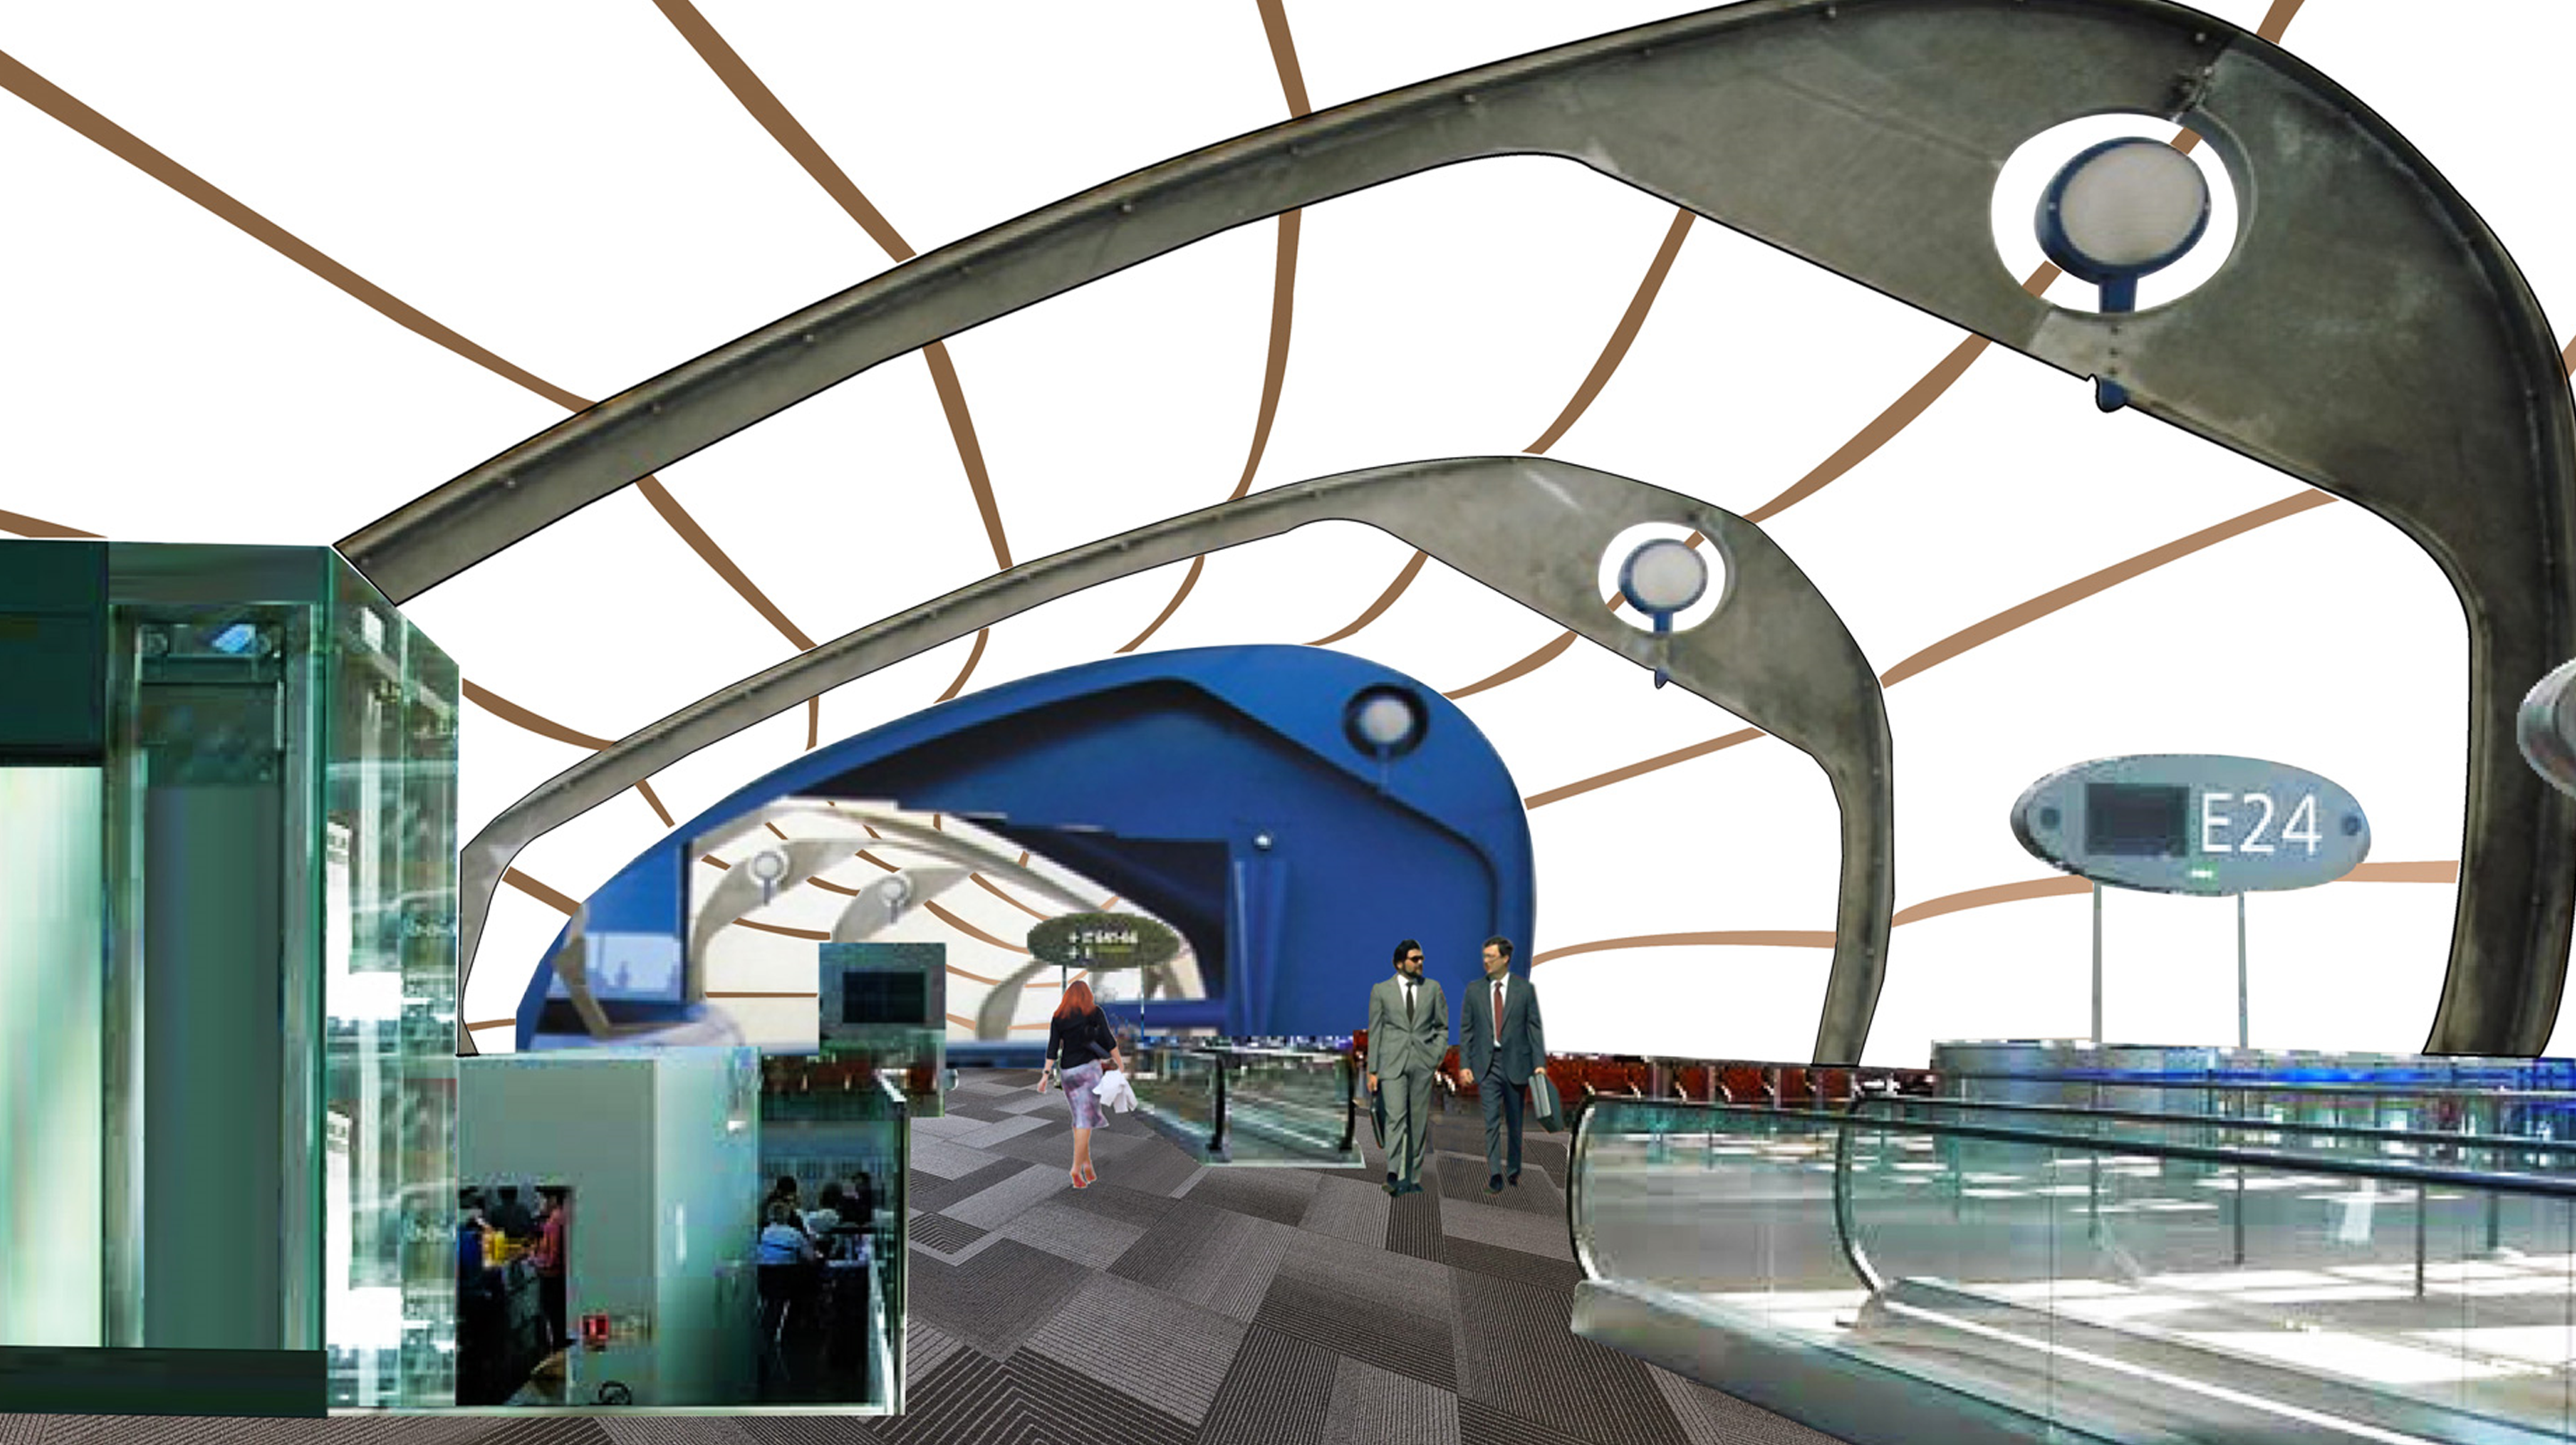 Departure pier - 3d stretch ceiling translucent with backlighting